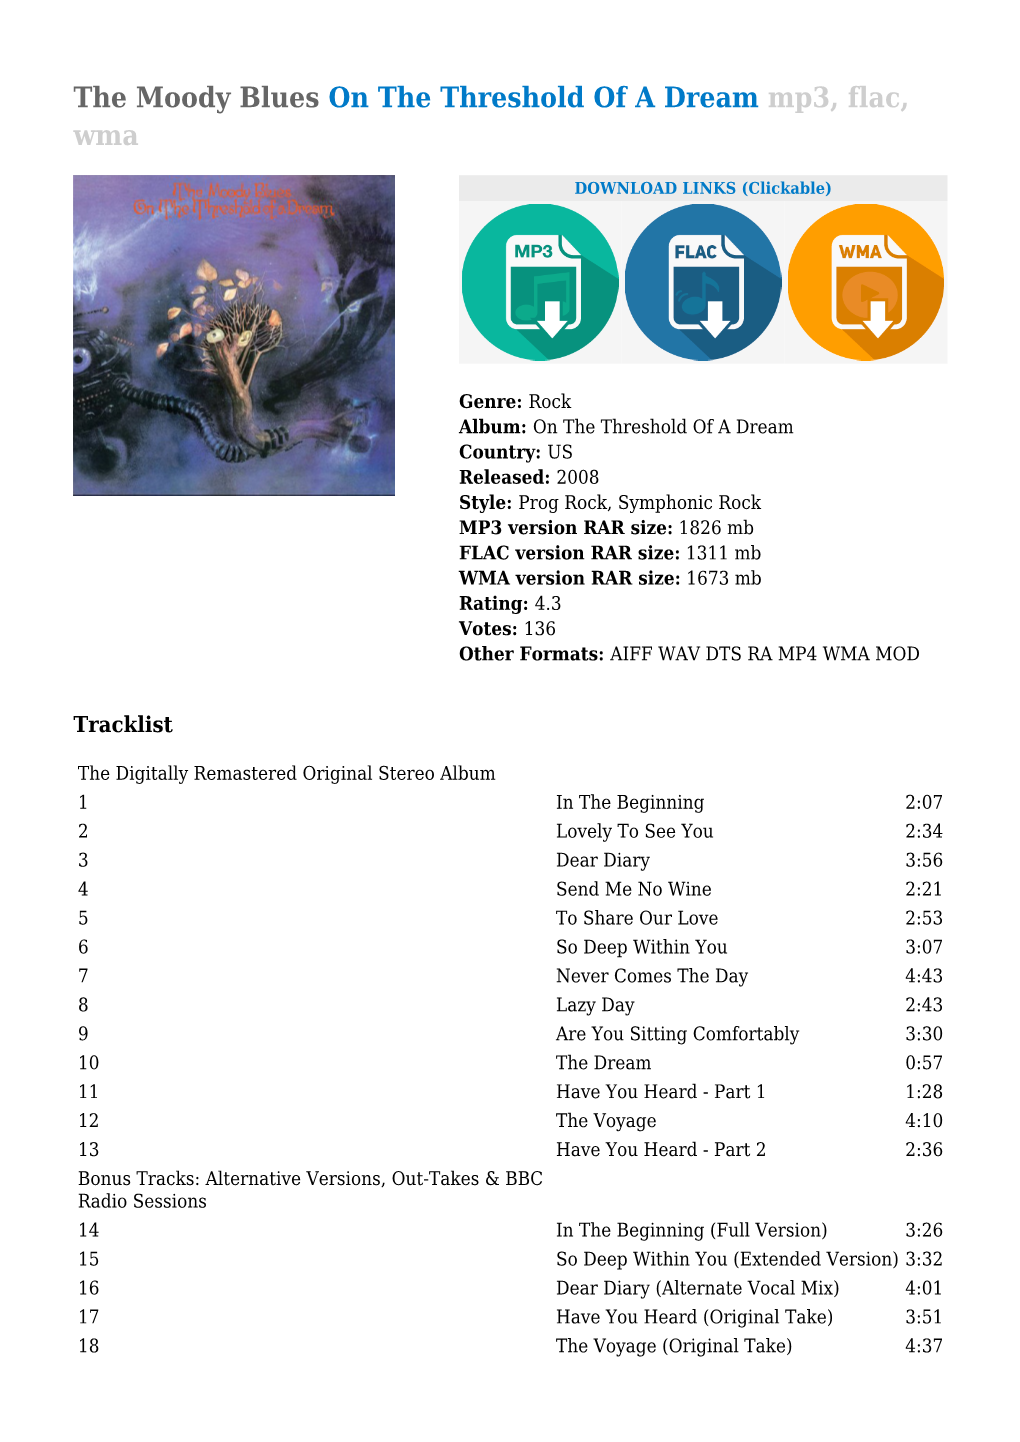 The Moody Blues on the Threshold of a Dream Mp3, Flac, Wma